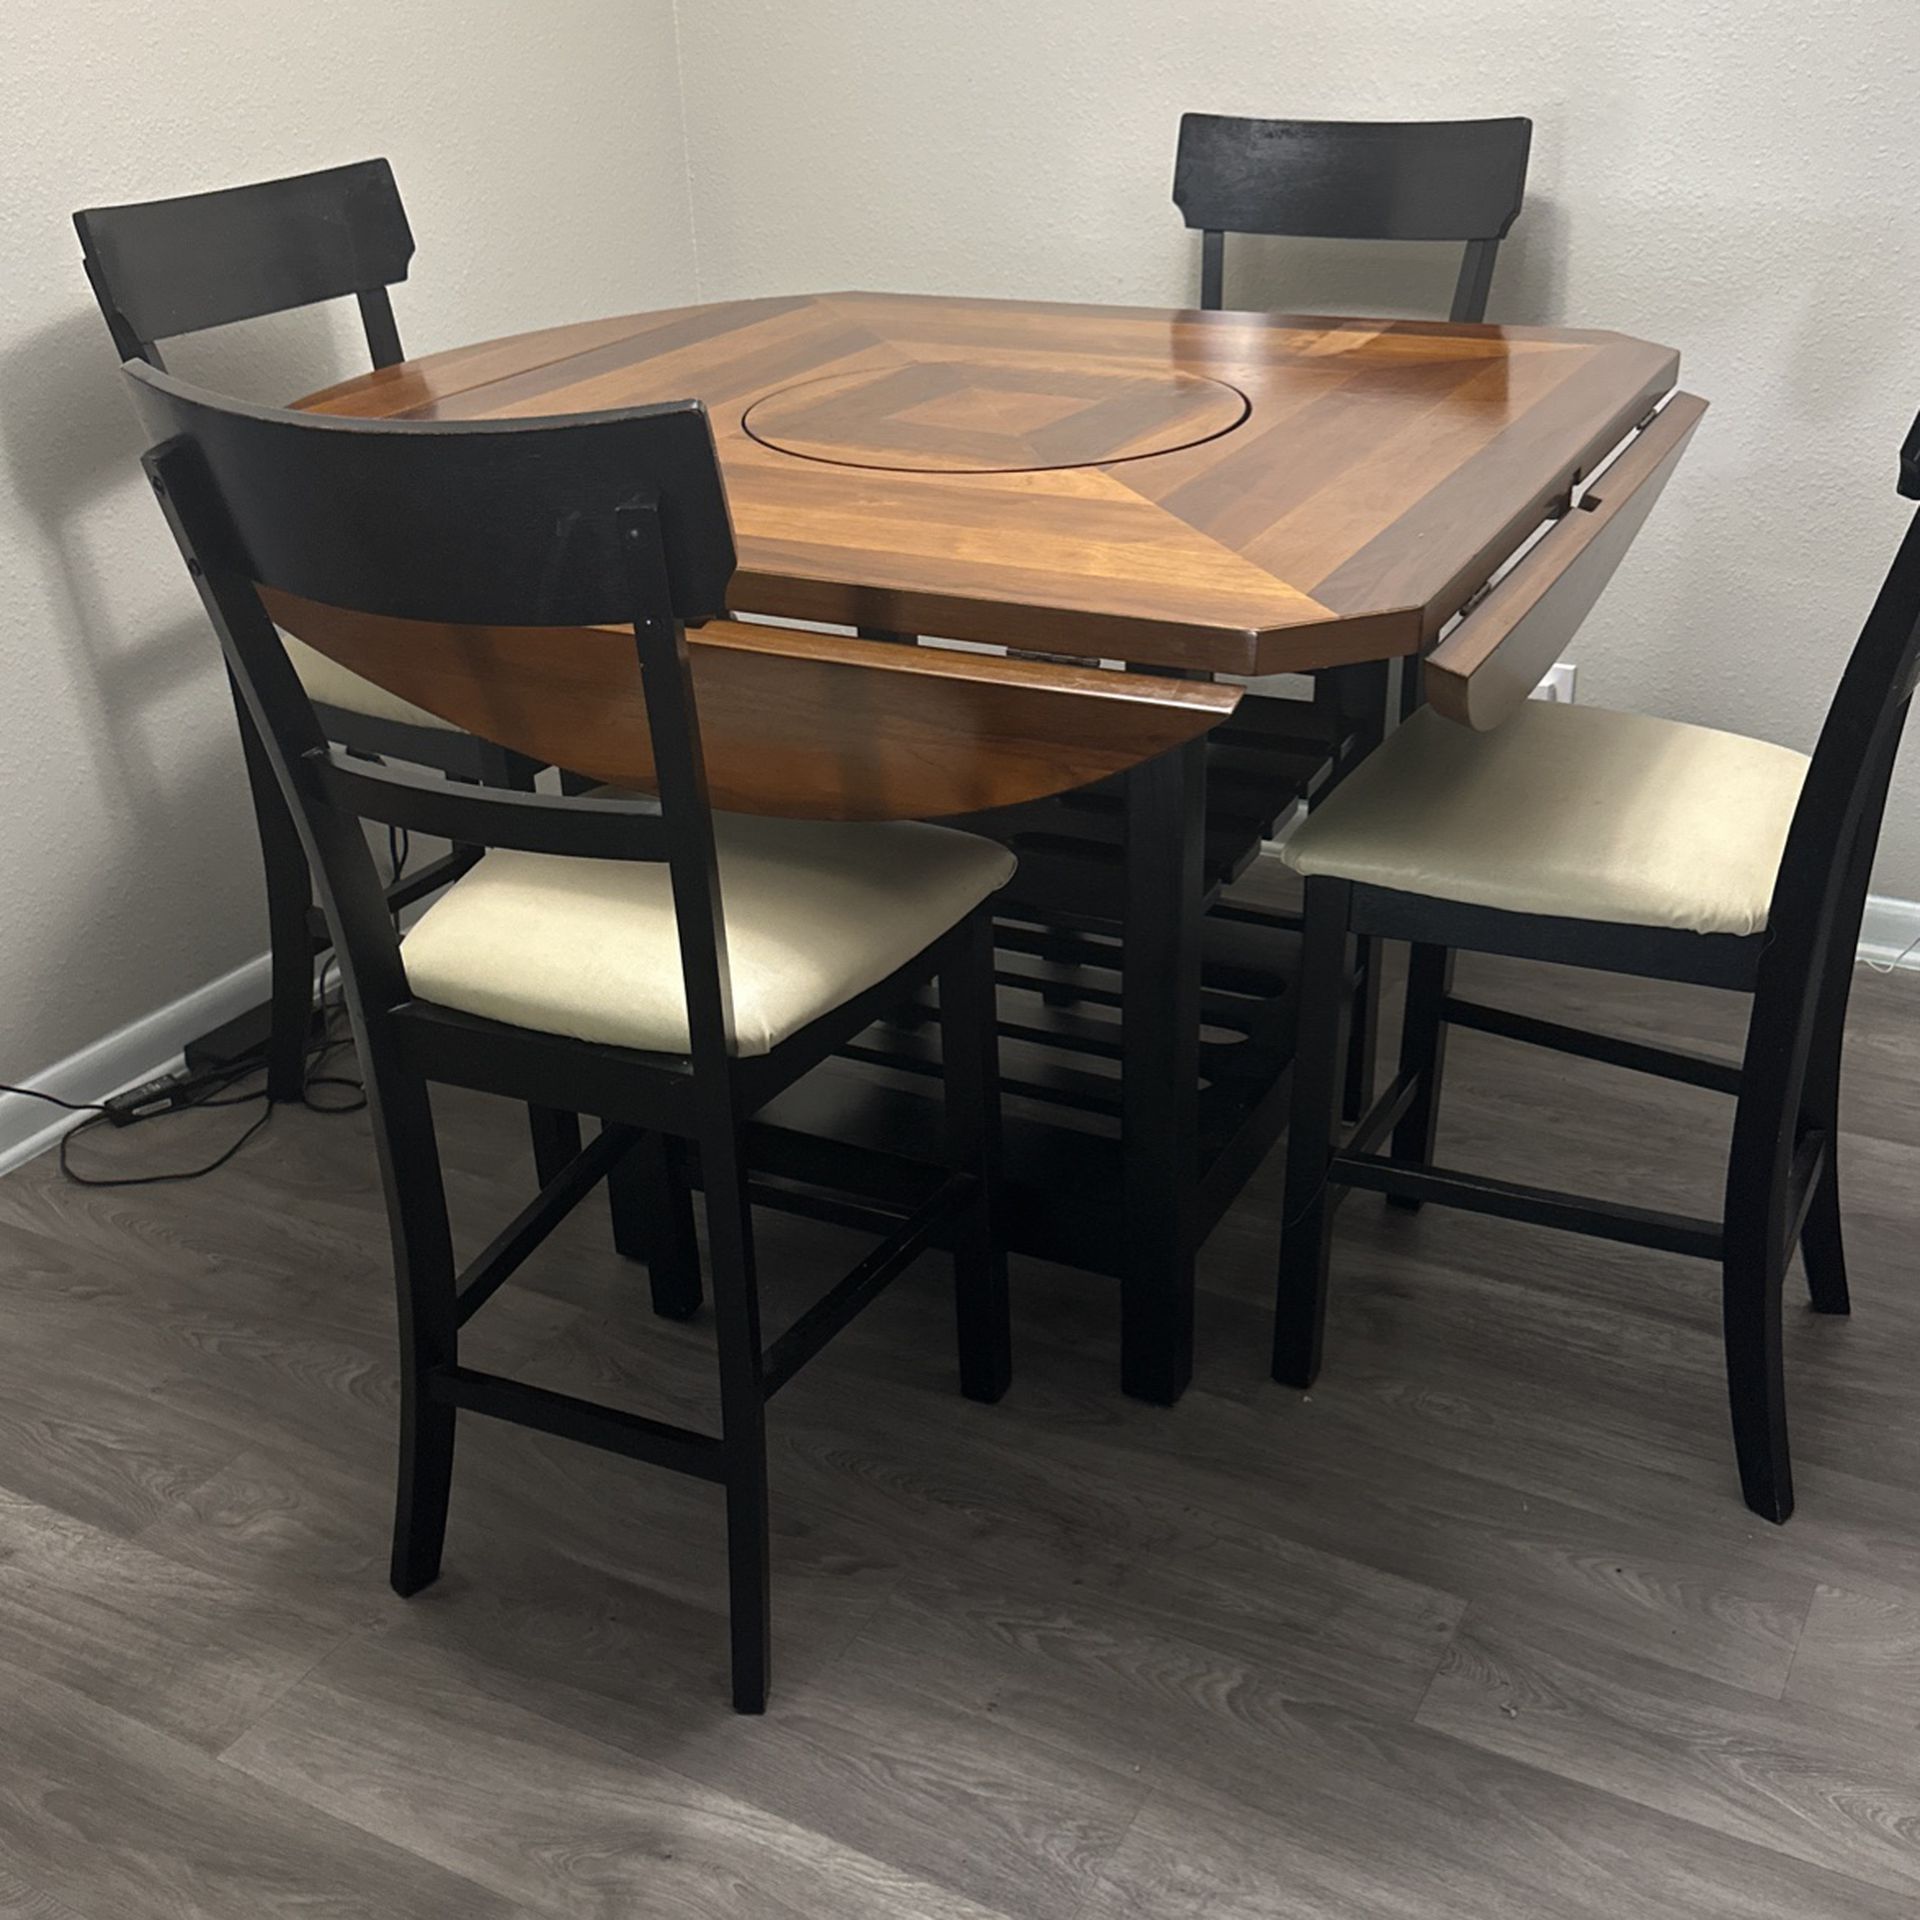 55x55 Table And 4 Chairs Wood 